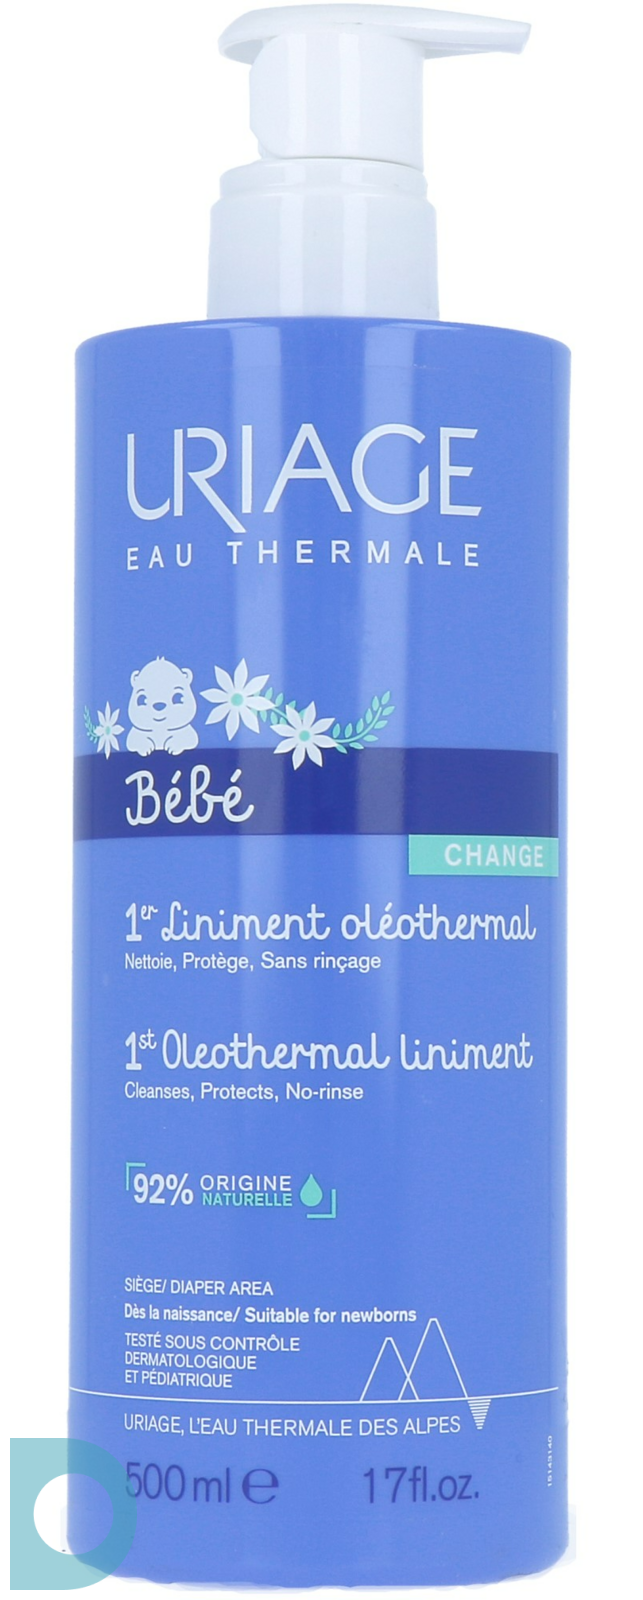 Uriage Baby 1st Anti-Itch Soothing Oil Balm